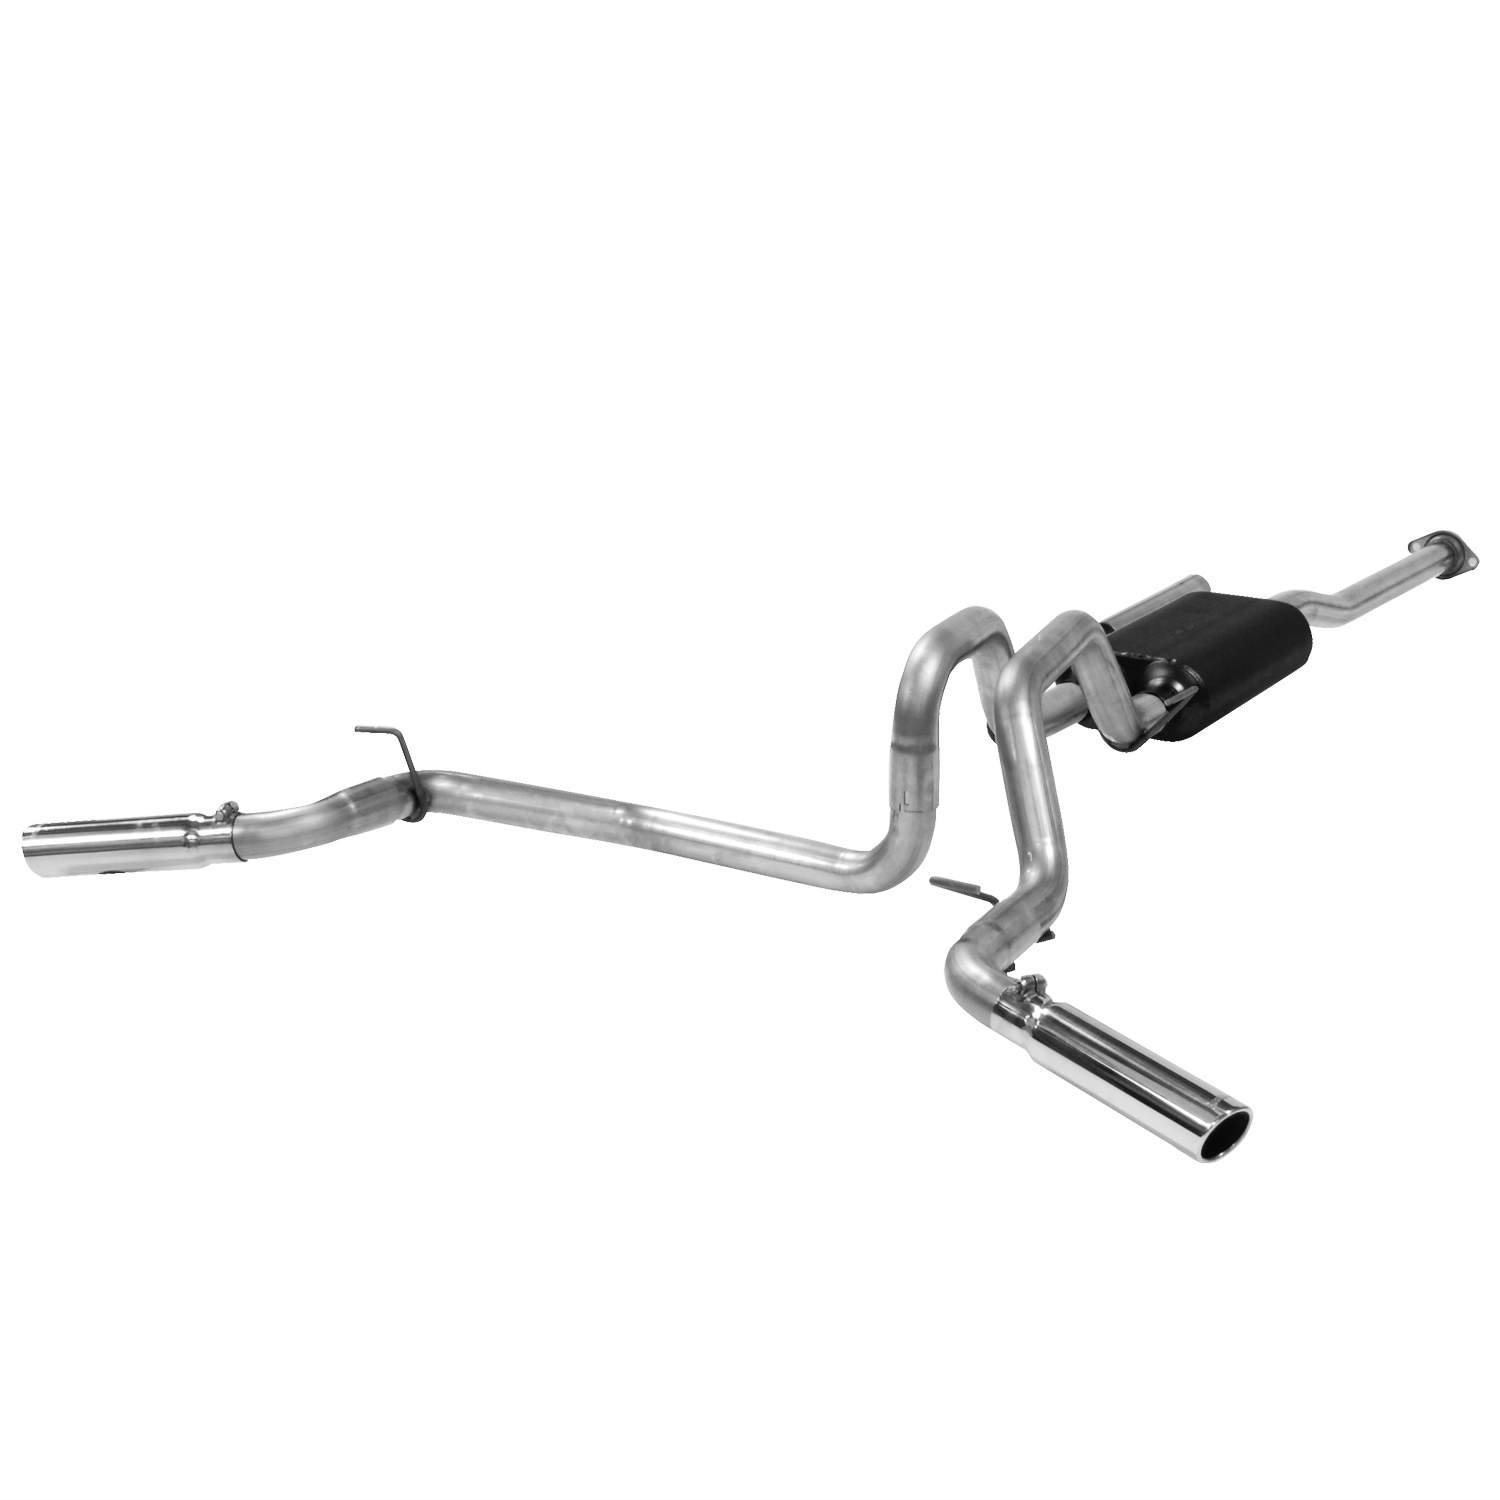 American Thunder Cat-Back Exhaust System 2005-2012 Tacoma 4.0L V6 (Exc. Std Cab/X-Runner)